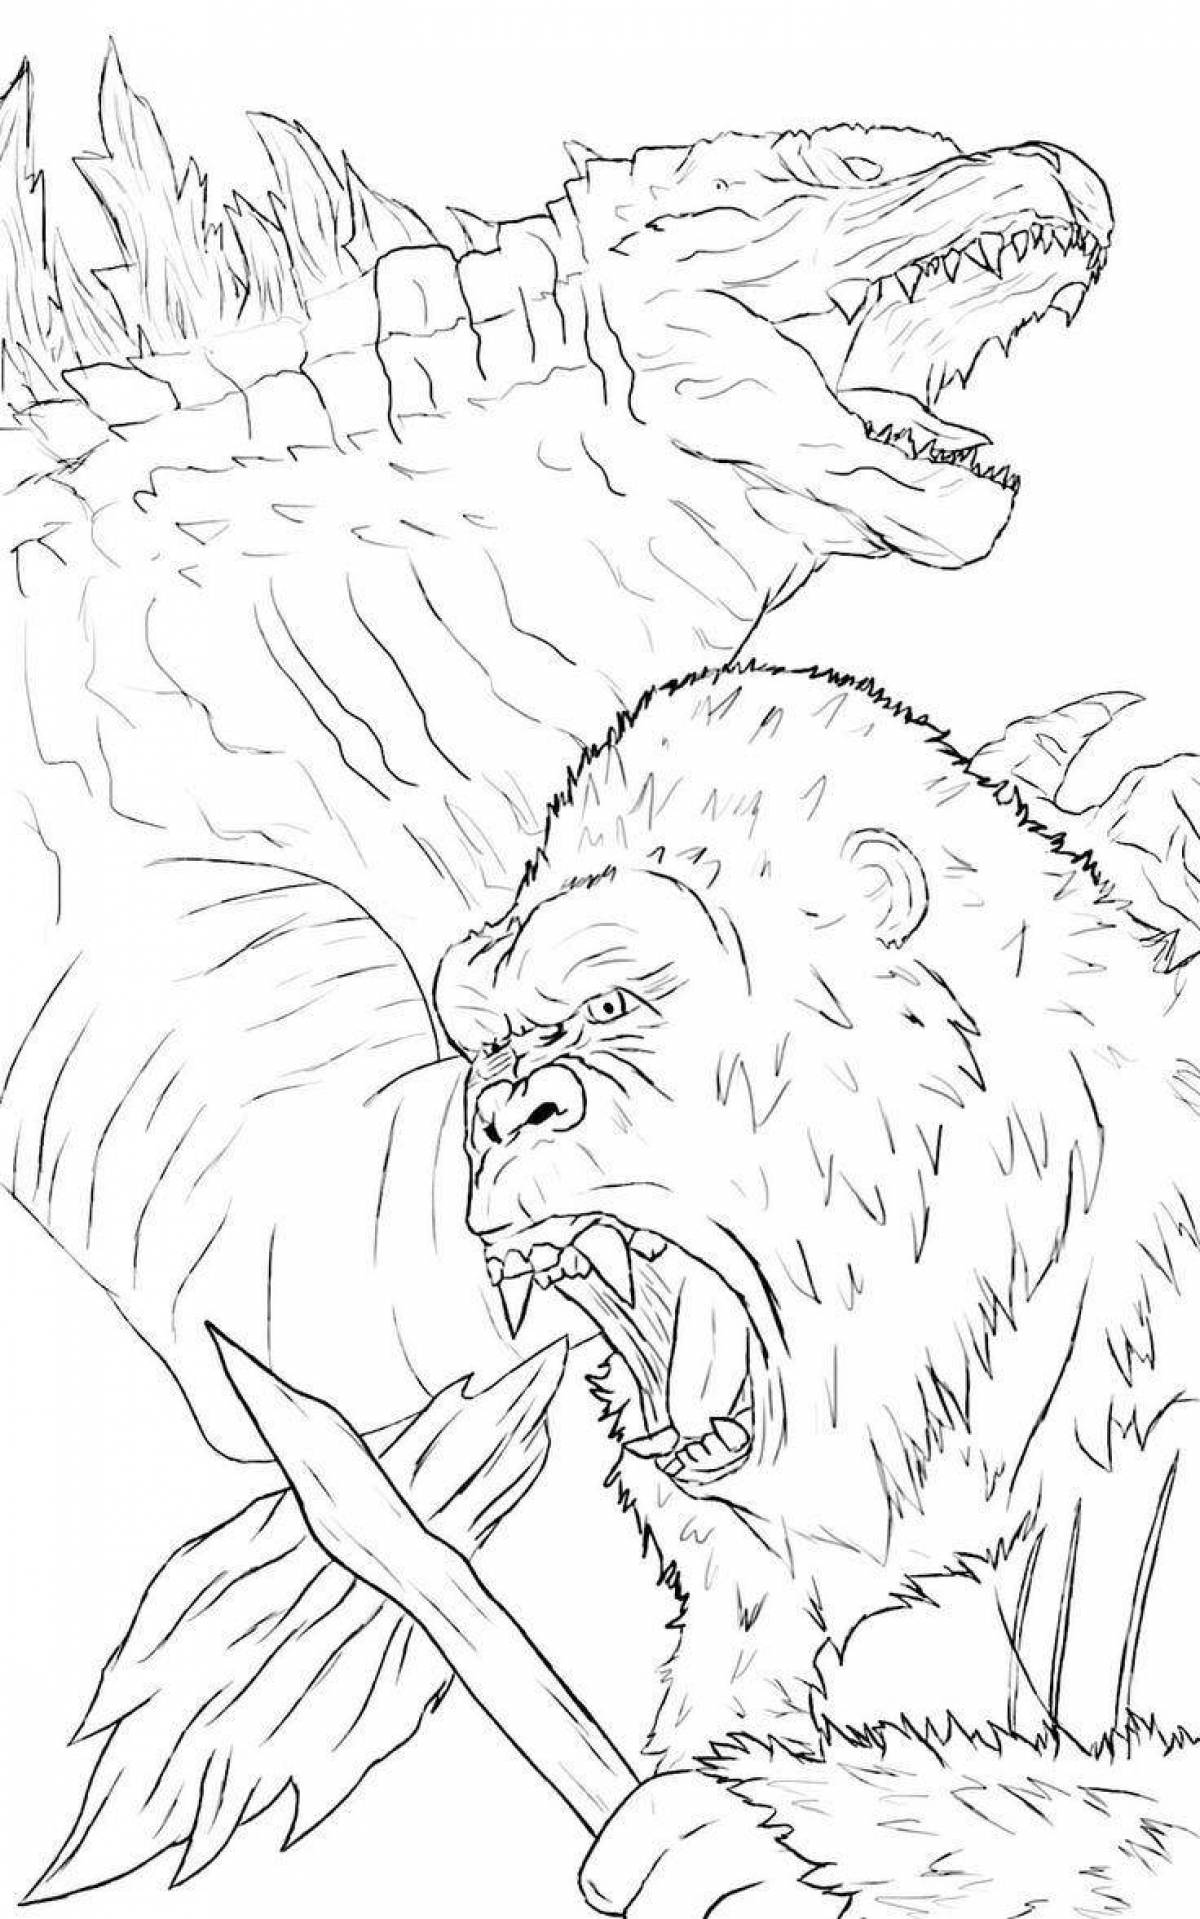 King kong skull island gorgeous coloring page